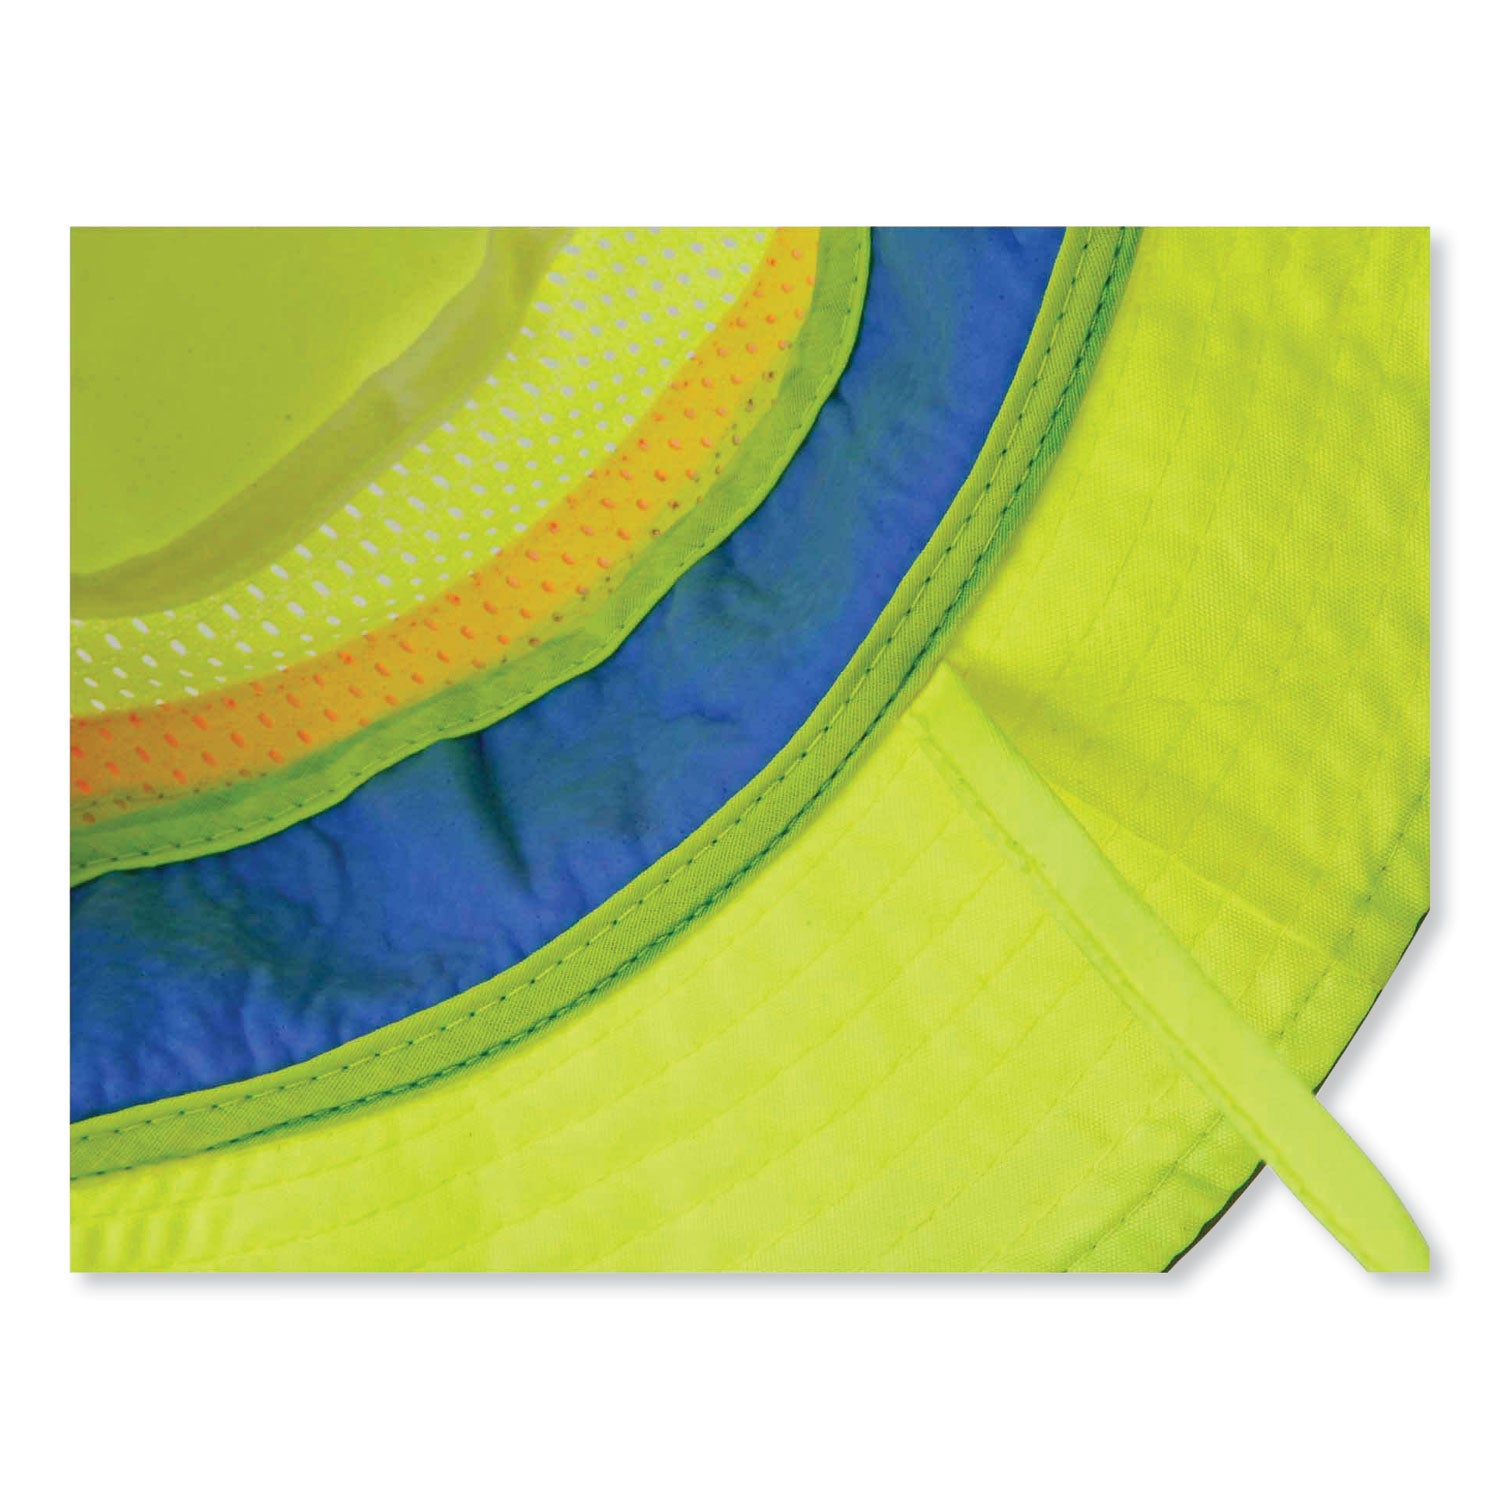 chill-its-8935ct-hi-vis-pva-ranger-sun-hat-large-x-large-lime-ships-in-1-3-business-days_ego12591 - 8